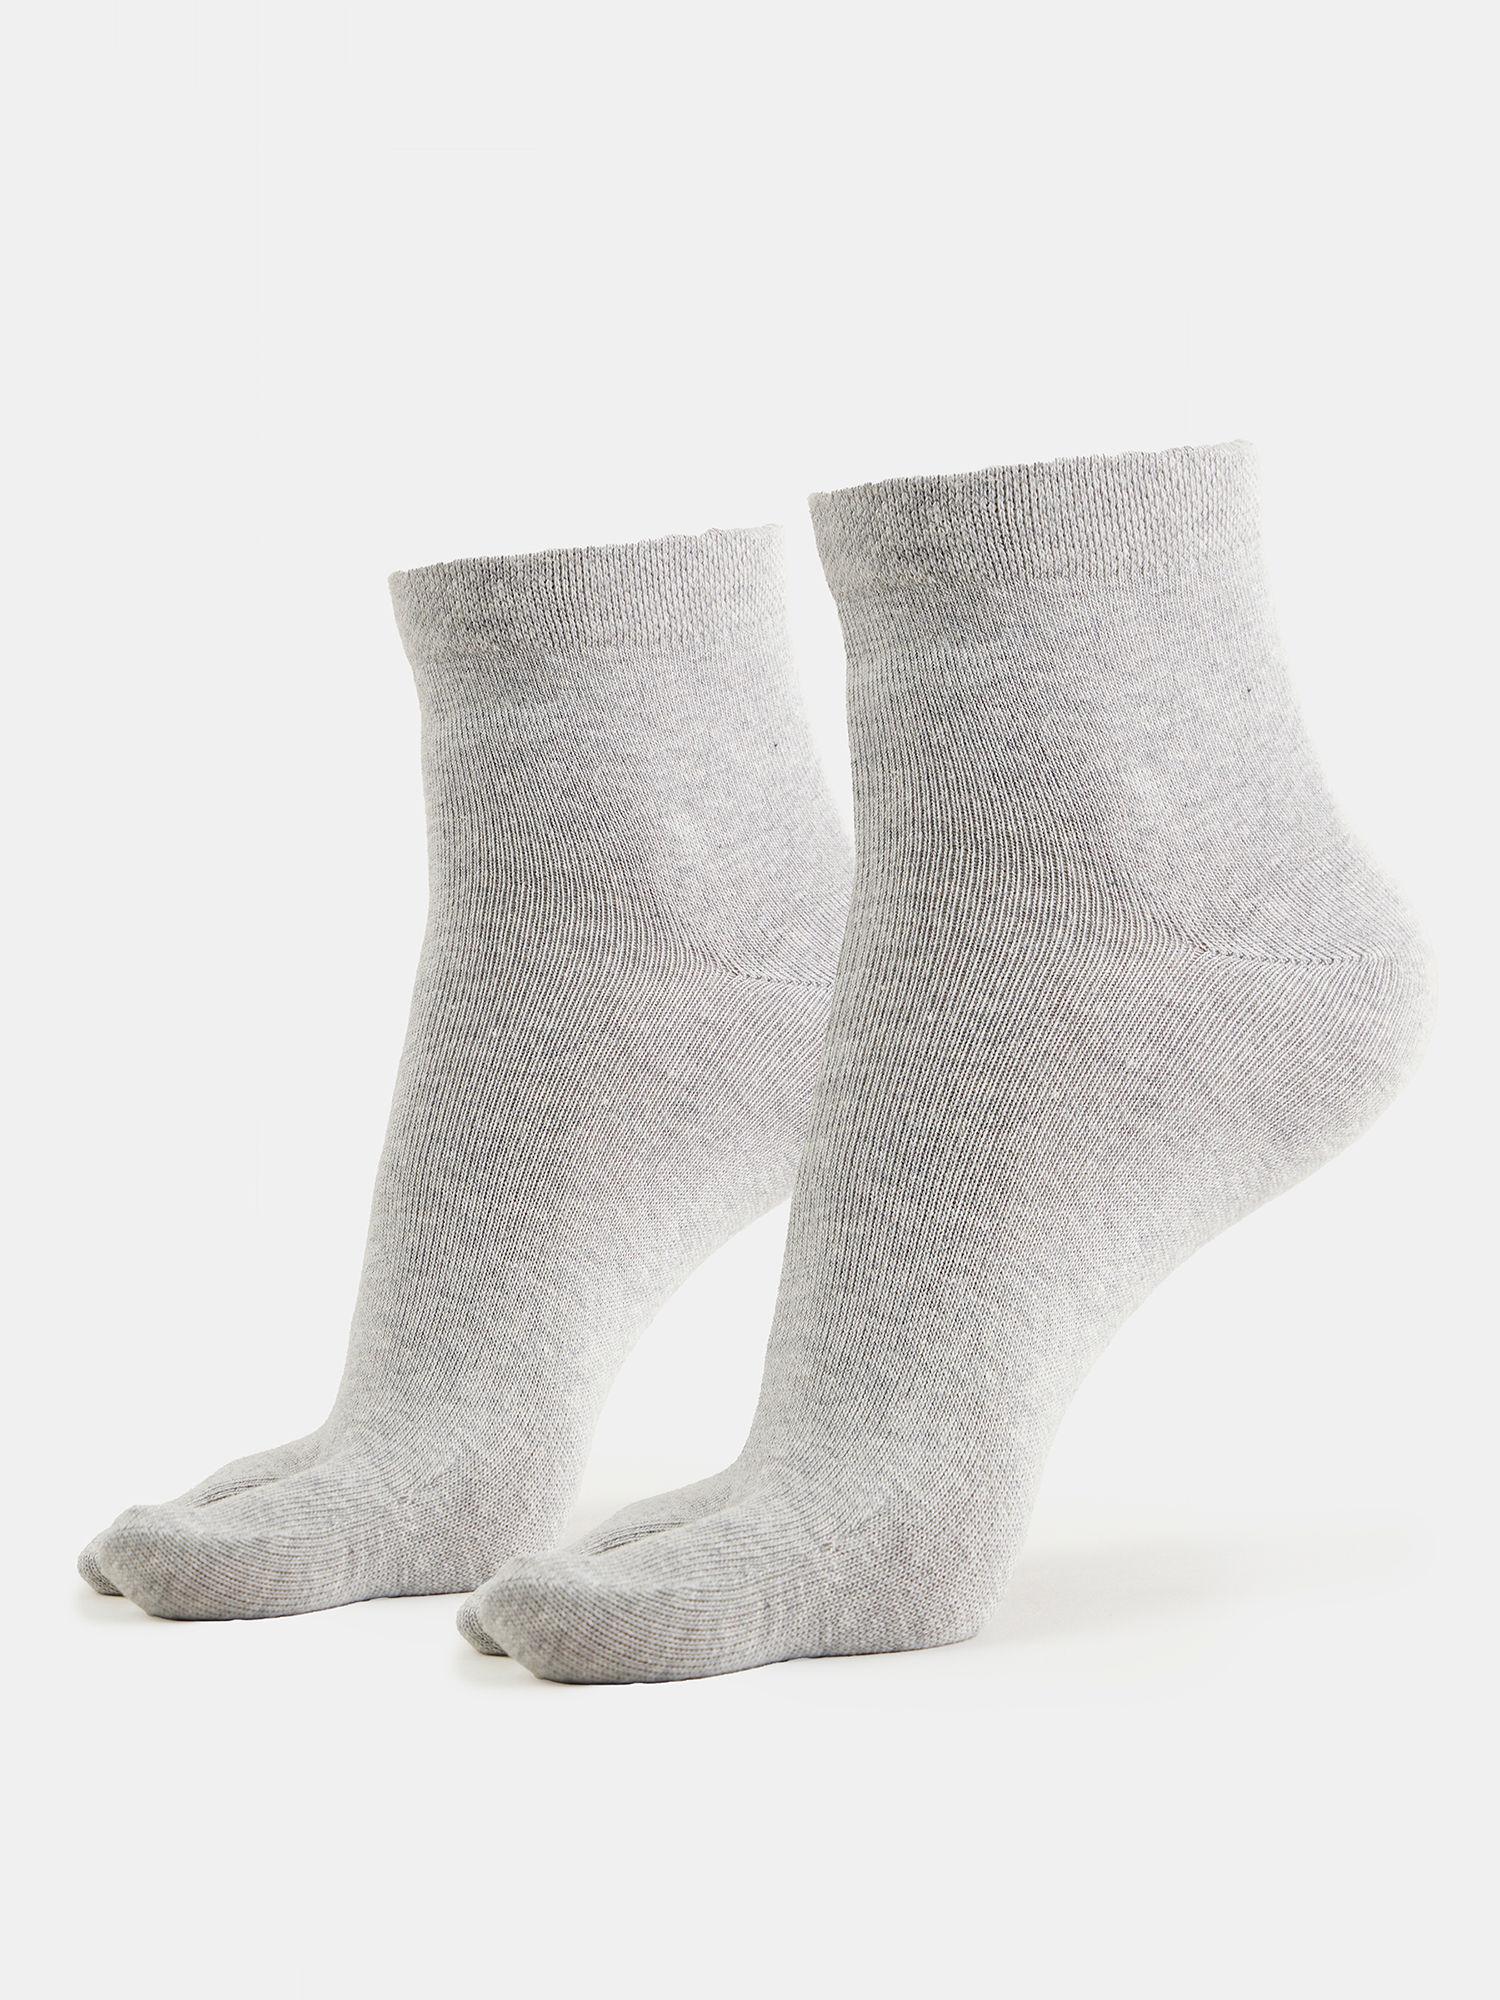 7487 womens compact cotton stretch toe socks - grey (pack of 2)